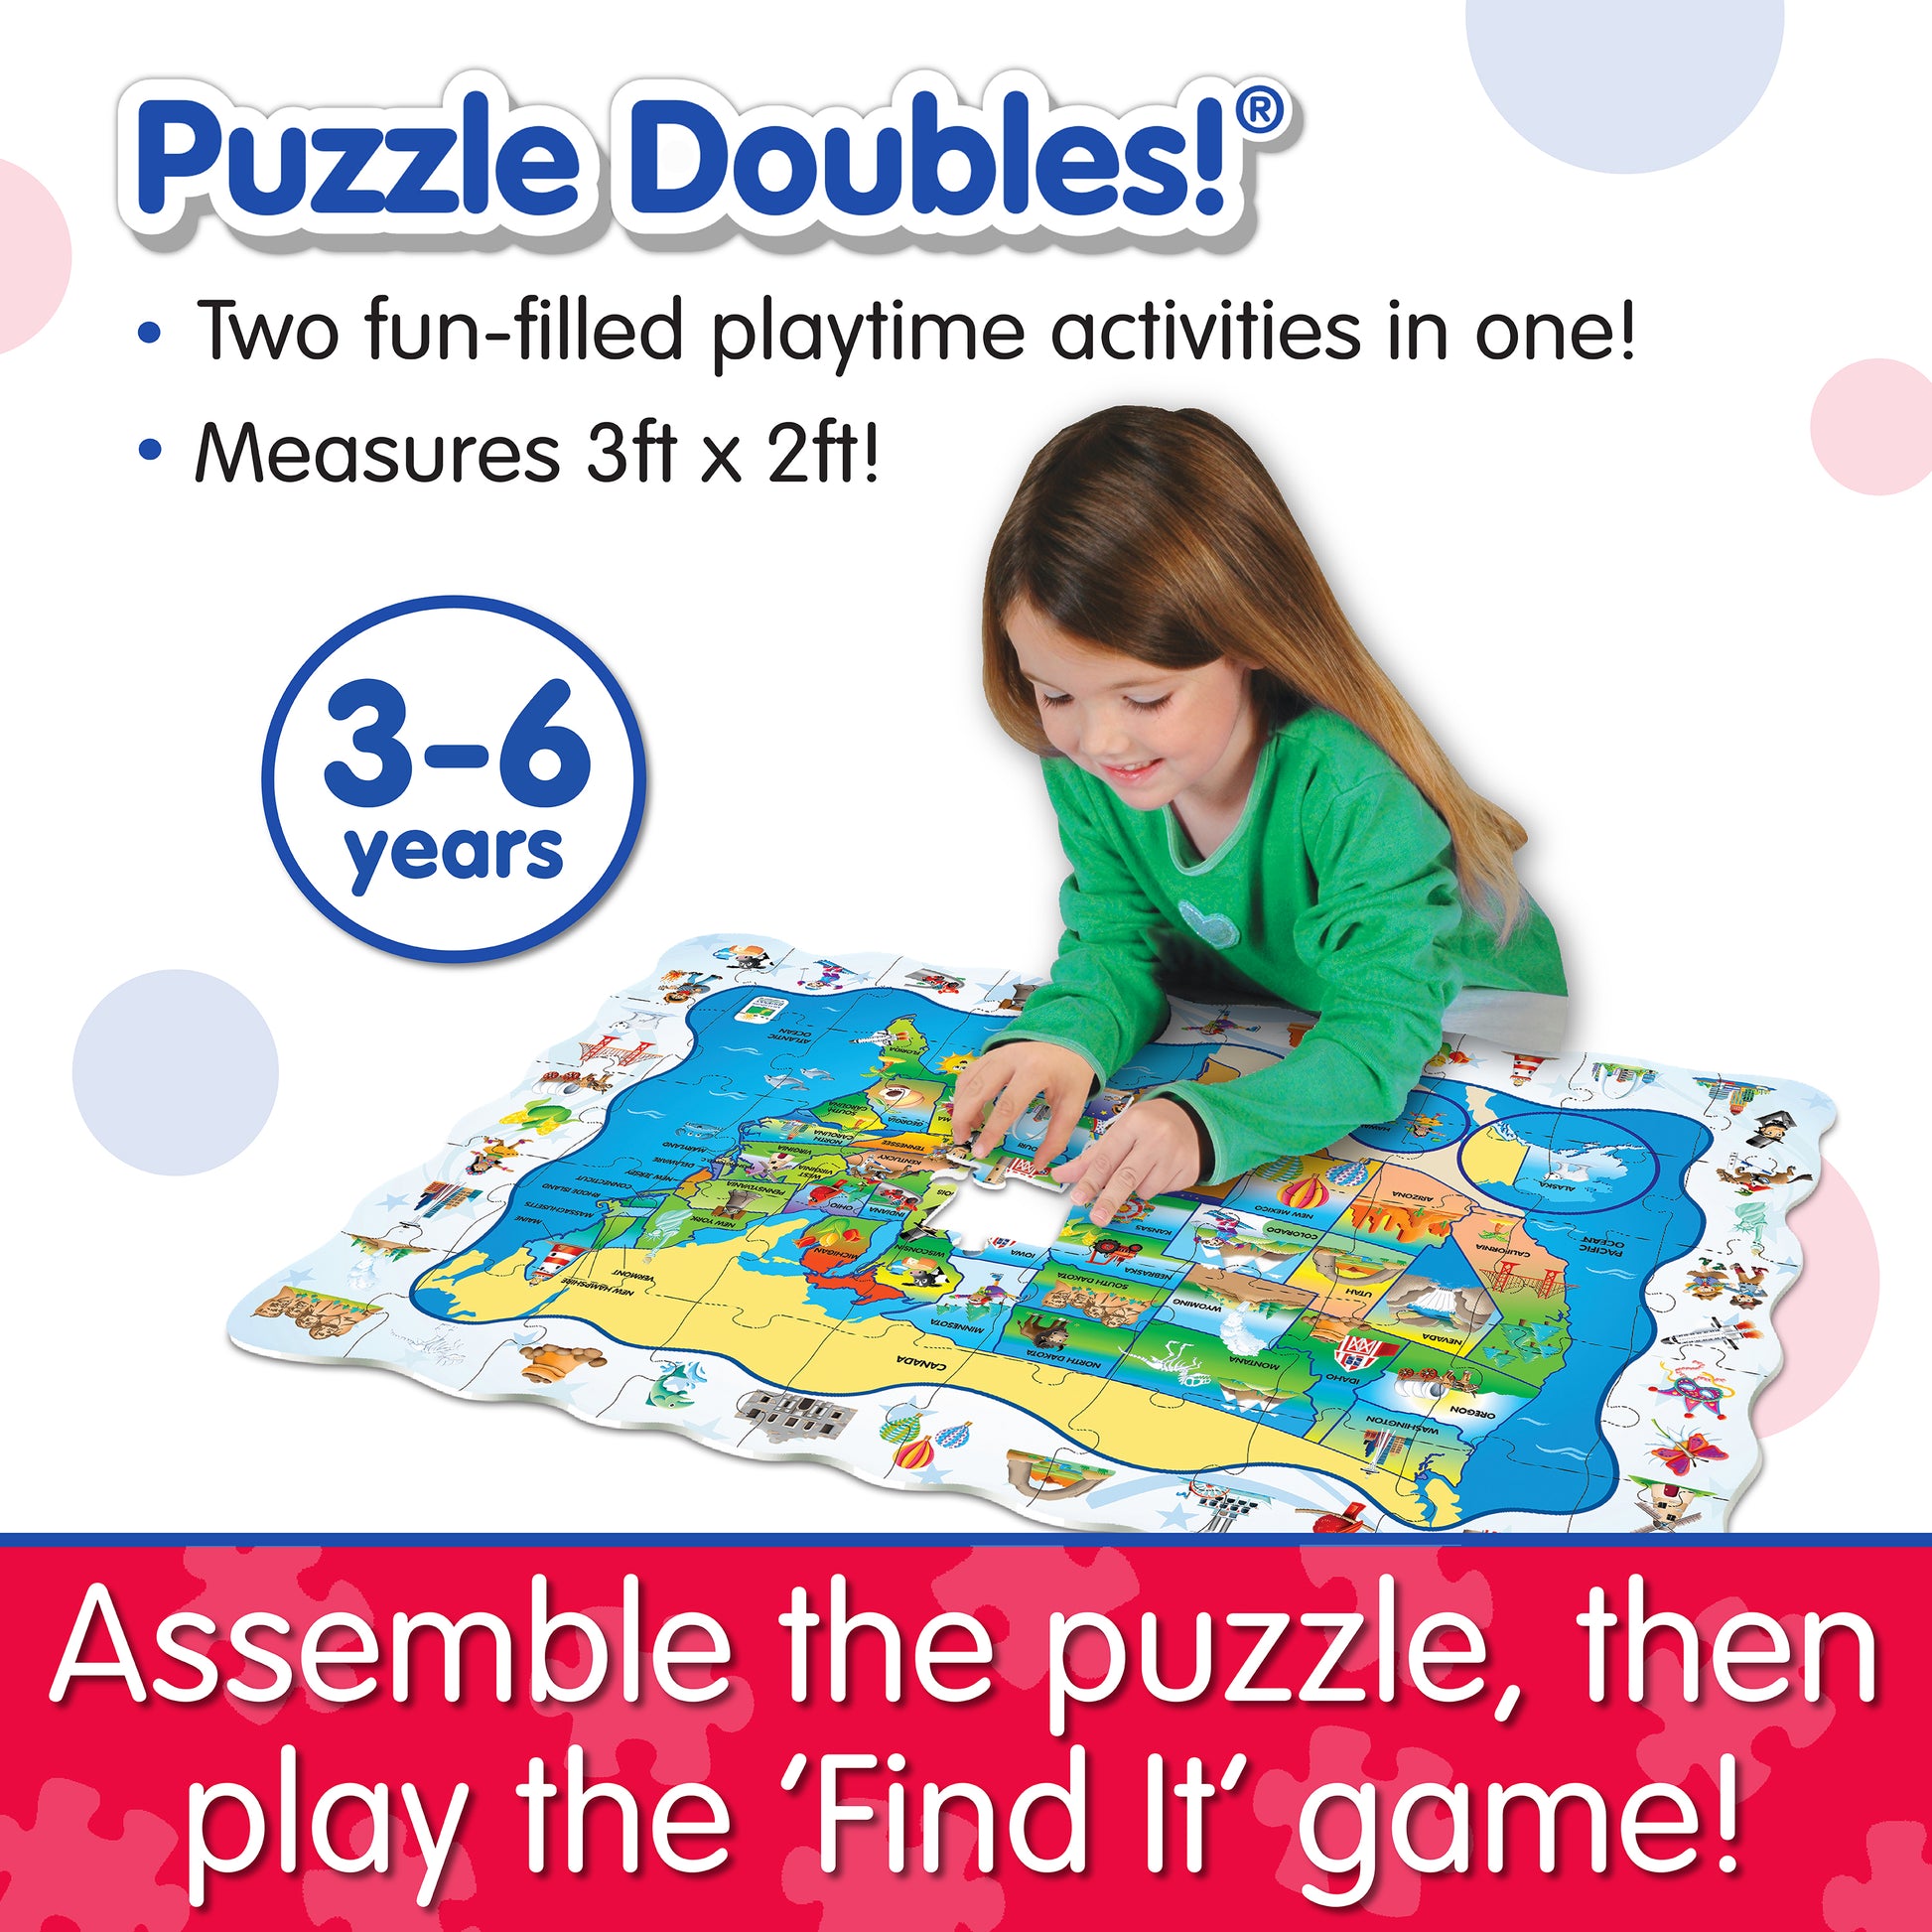 Infographic about Find It - USA that says, "Assemble the puzzle, then play the 'Find It' game!"